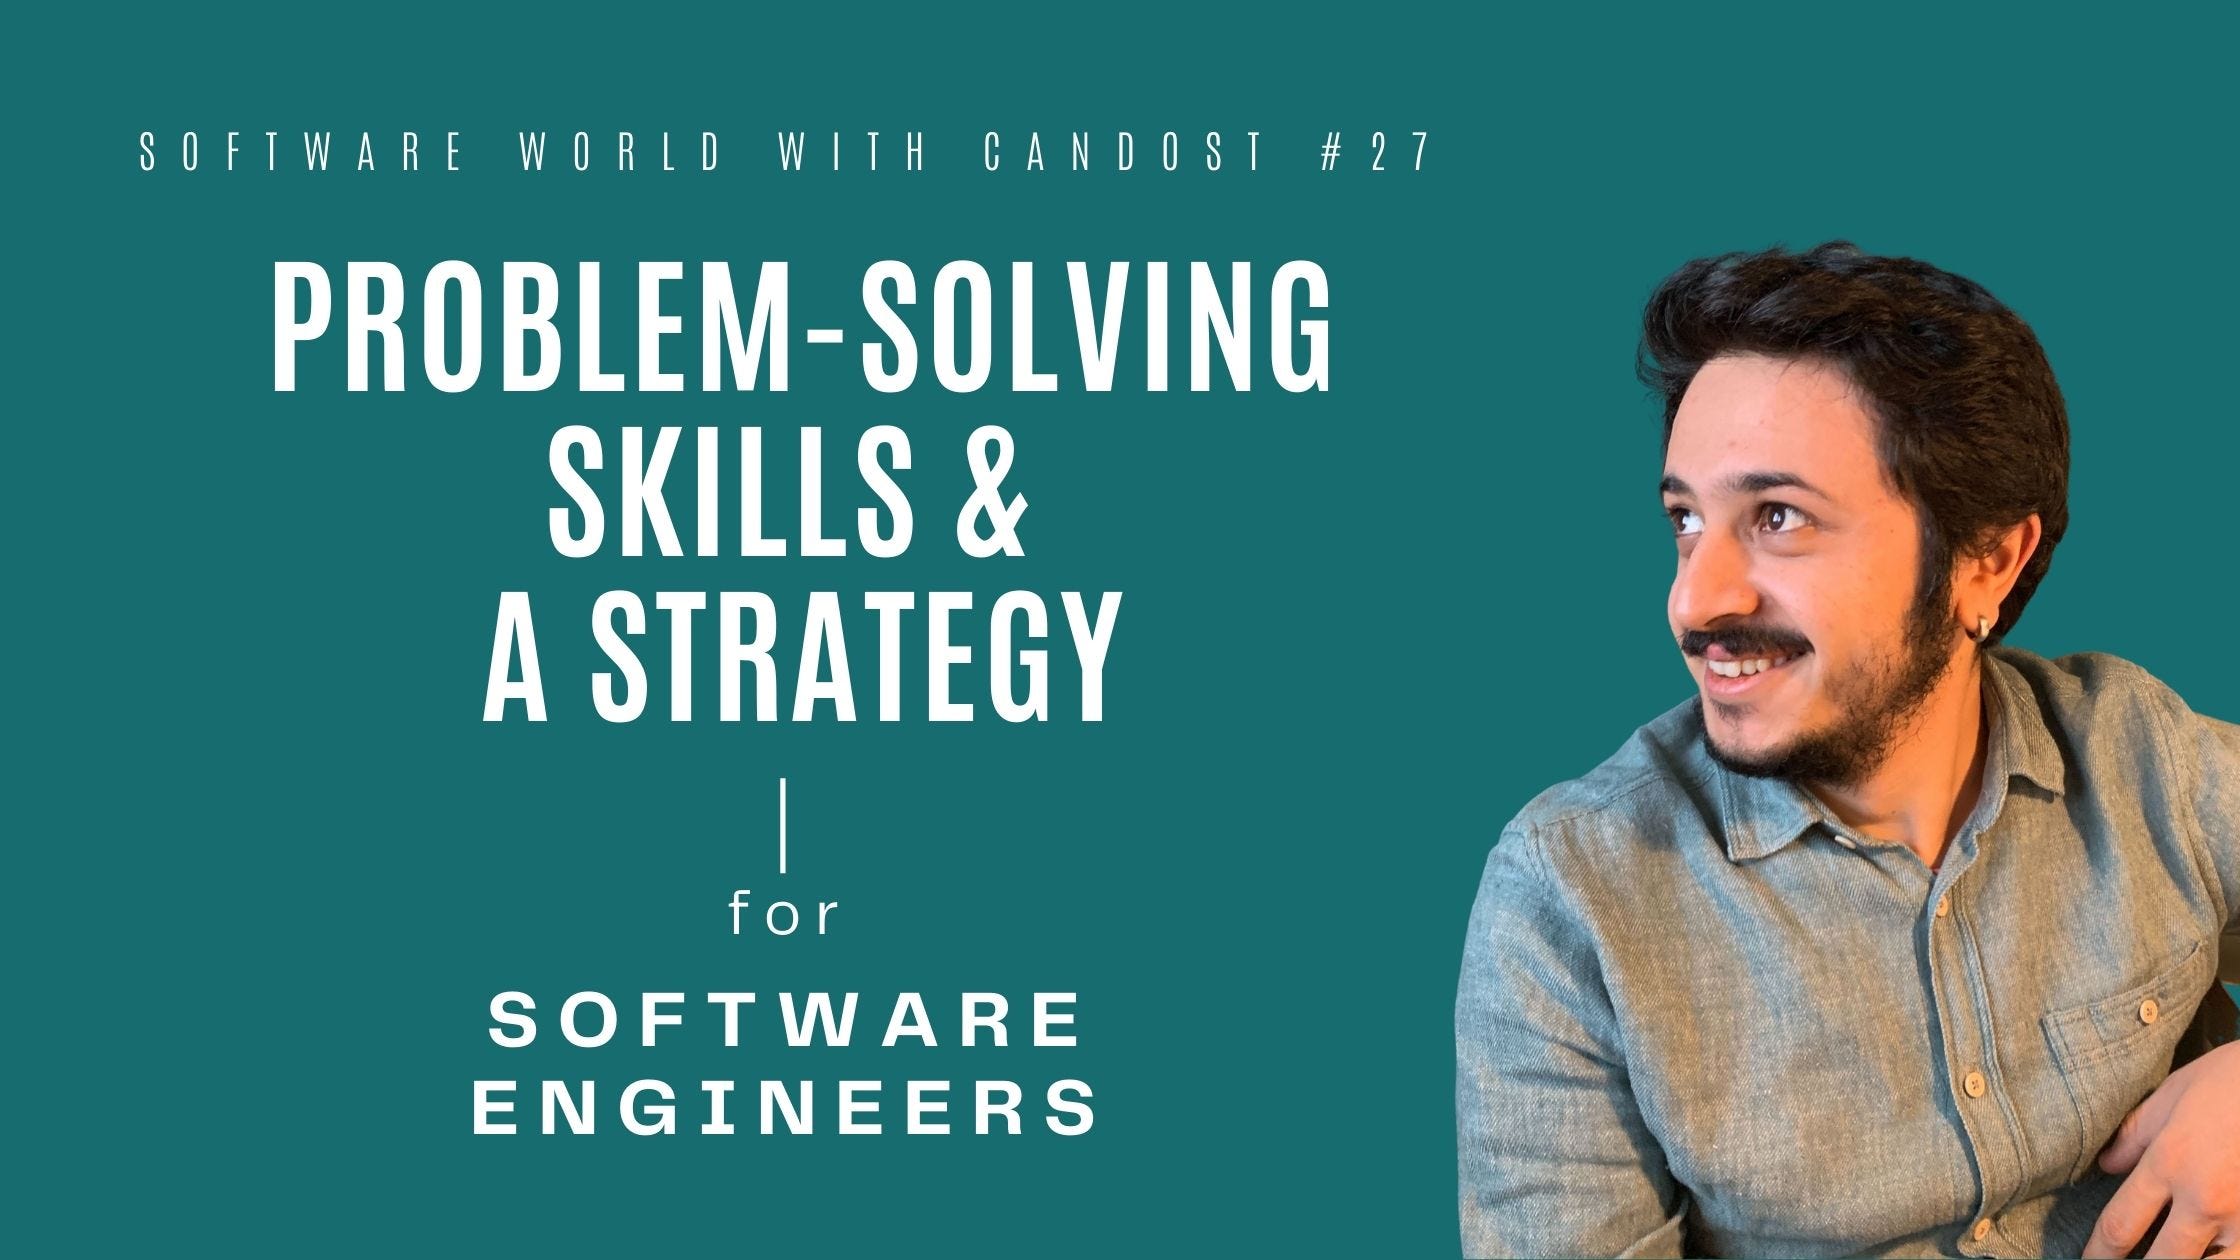 #27: Problem-Solving Skills & A Strategy for Software Engineers